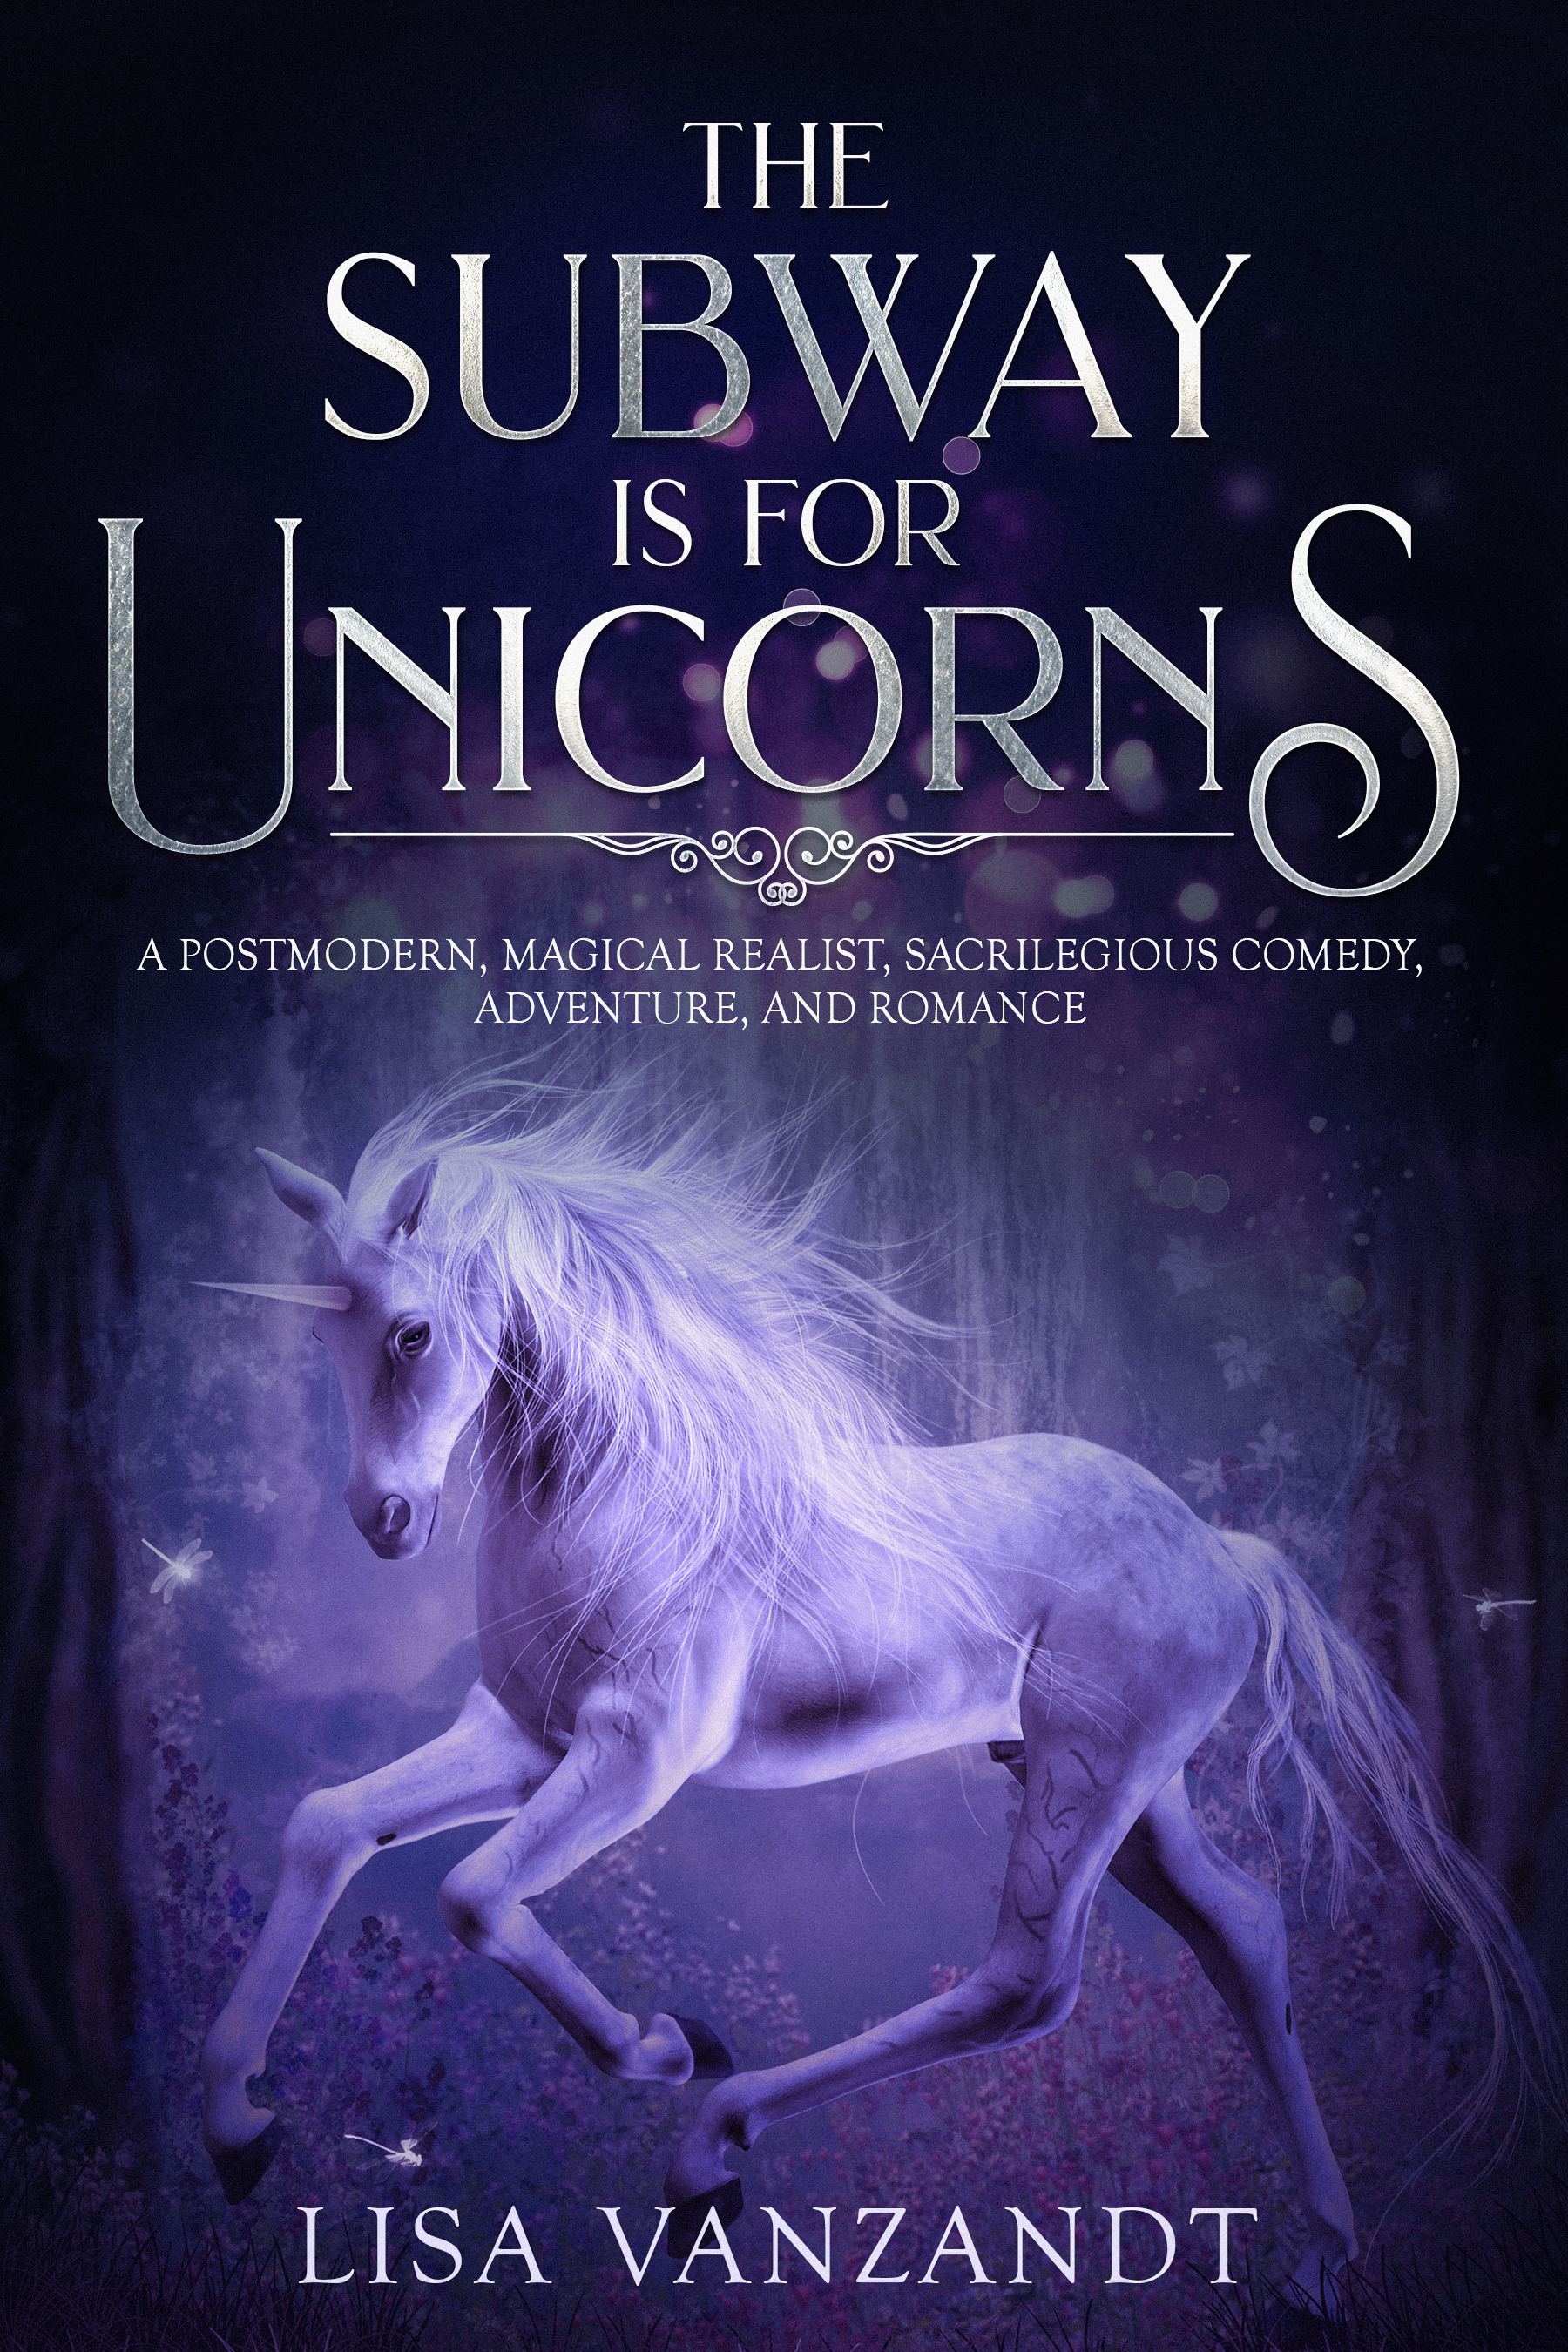 FREE: The Subway Is for Unicorns: A Postmodern, Magical Realist, Sacrilegious Comedy, Adventure, and Romance by Lisa VanZandt by Lisa VanZandt